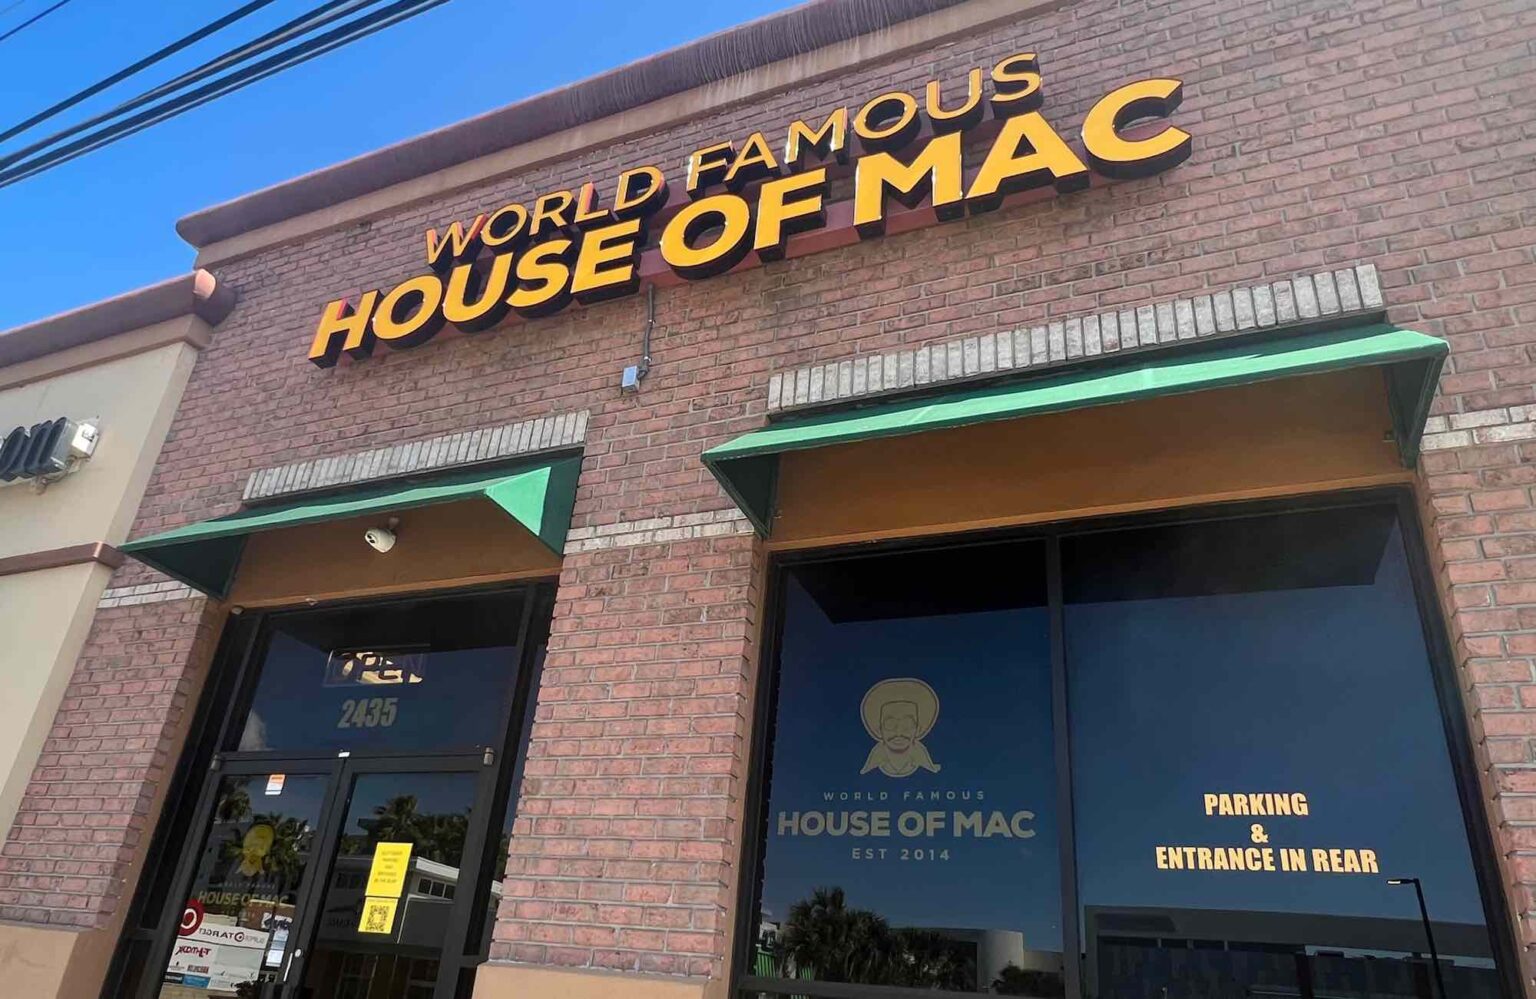 World Famous House Of Mac 1536x999 